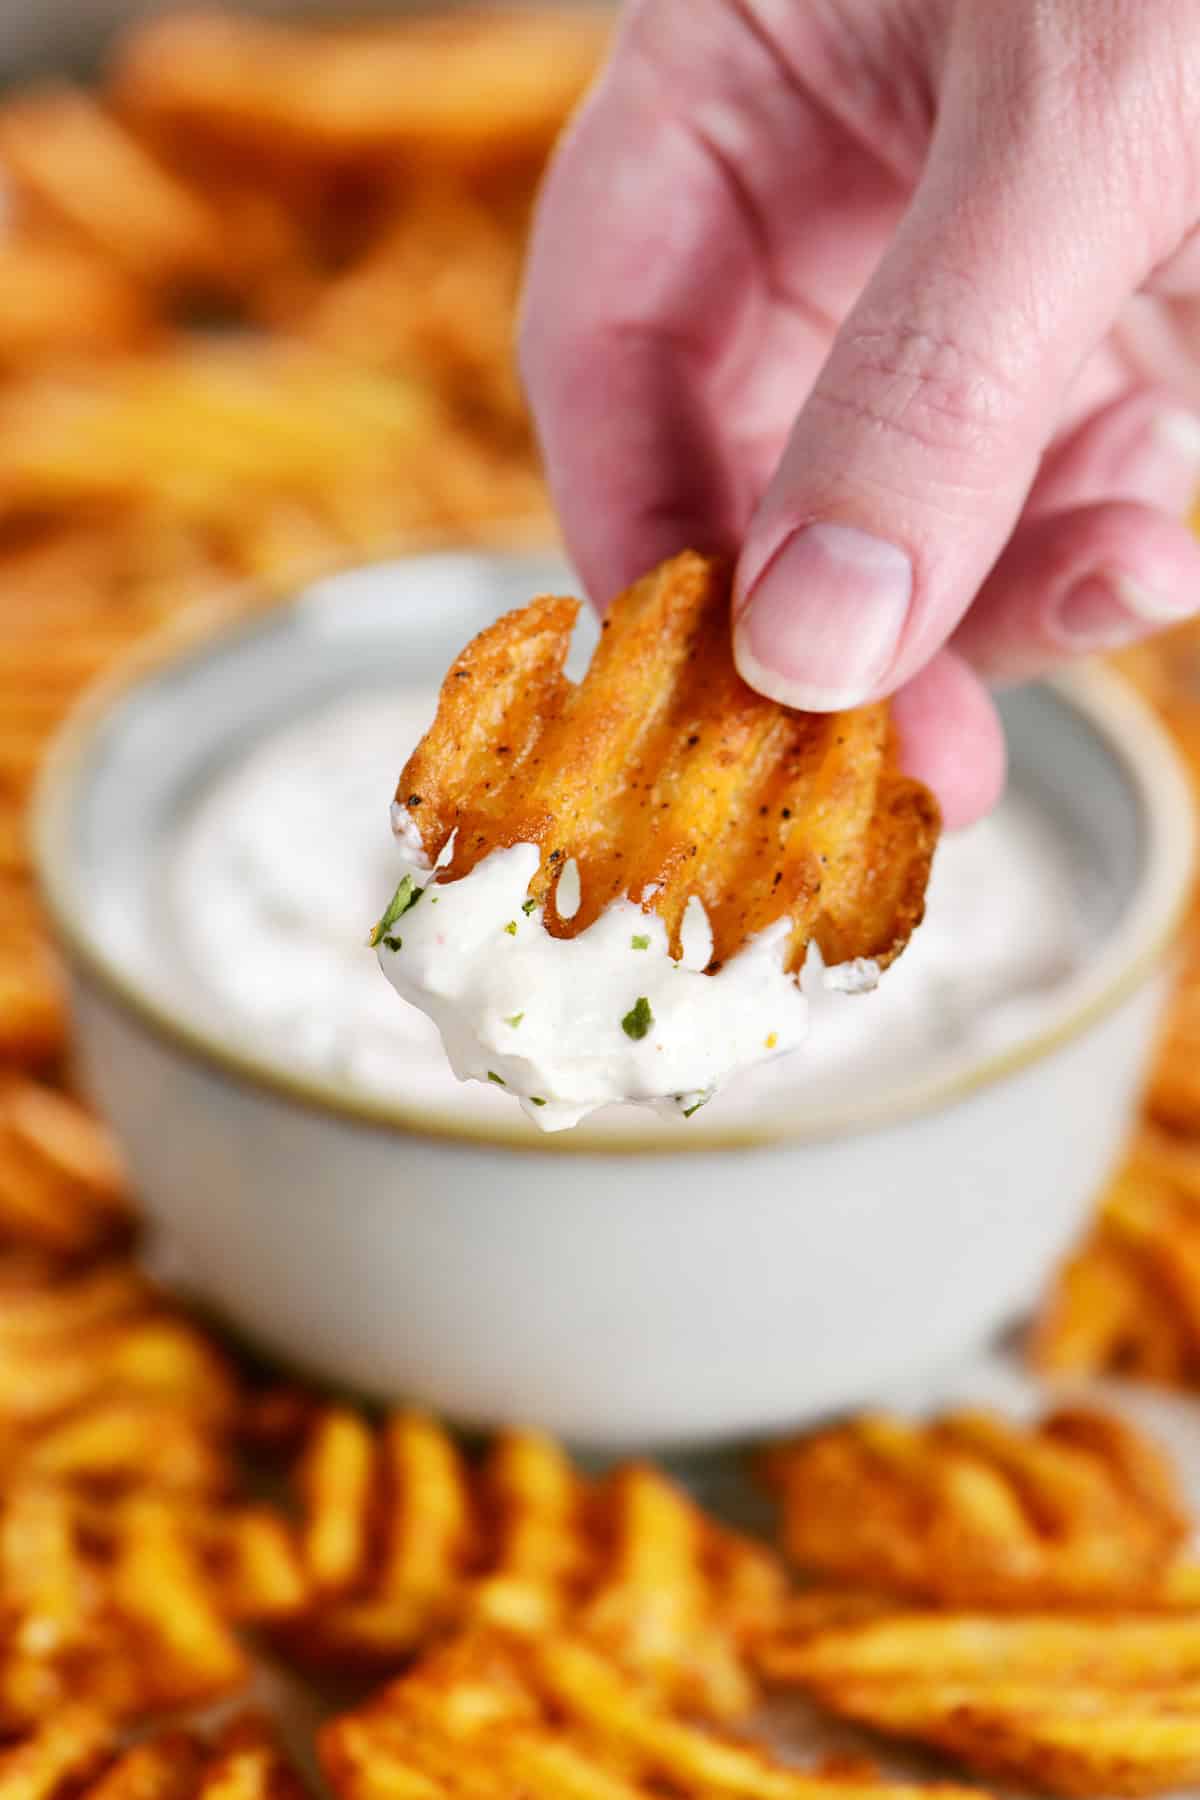 A hand holding a waffle fry with seasoned sour cream on top.